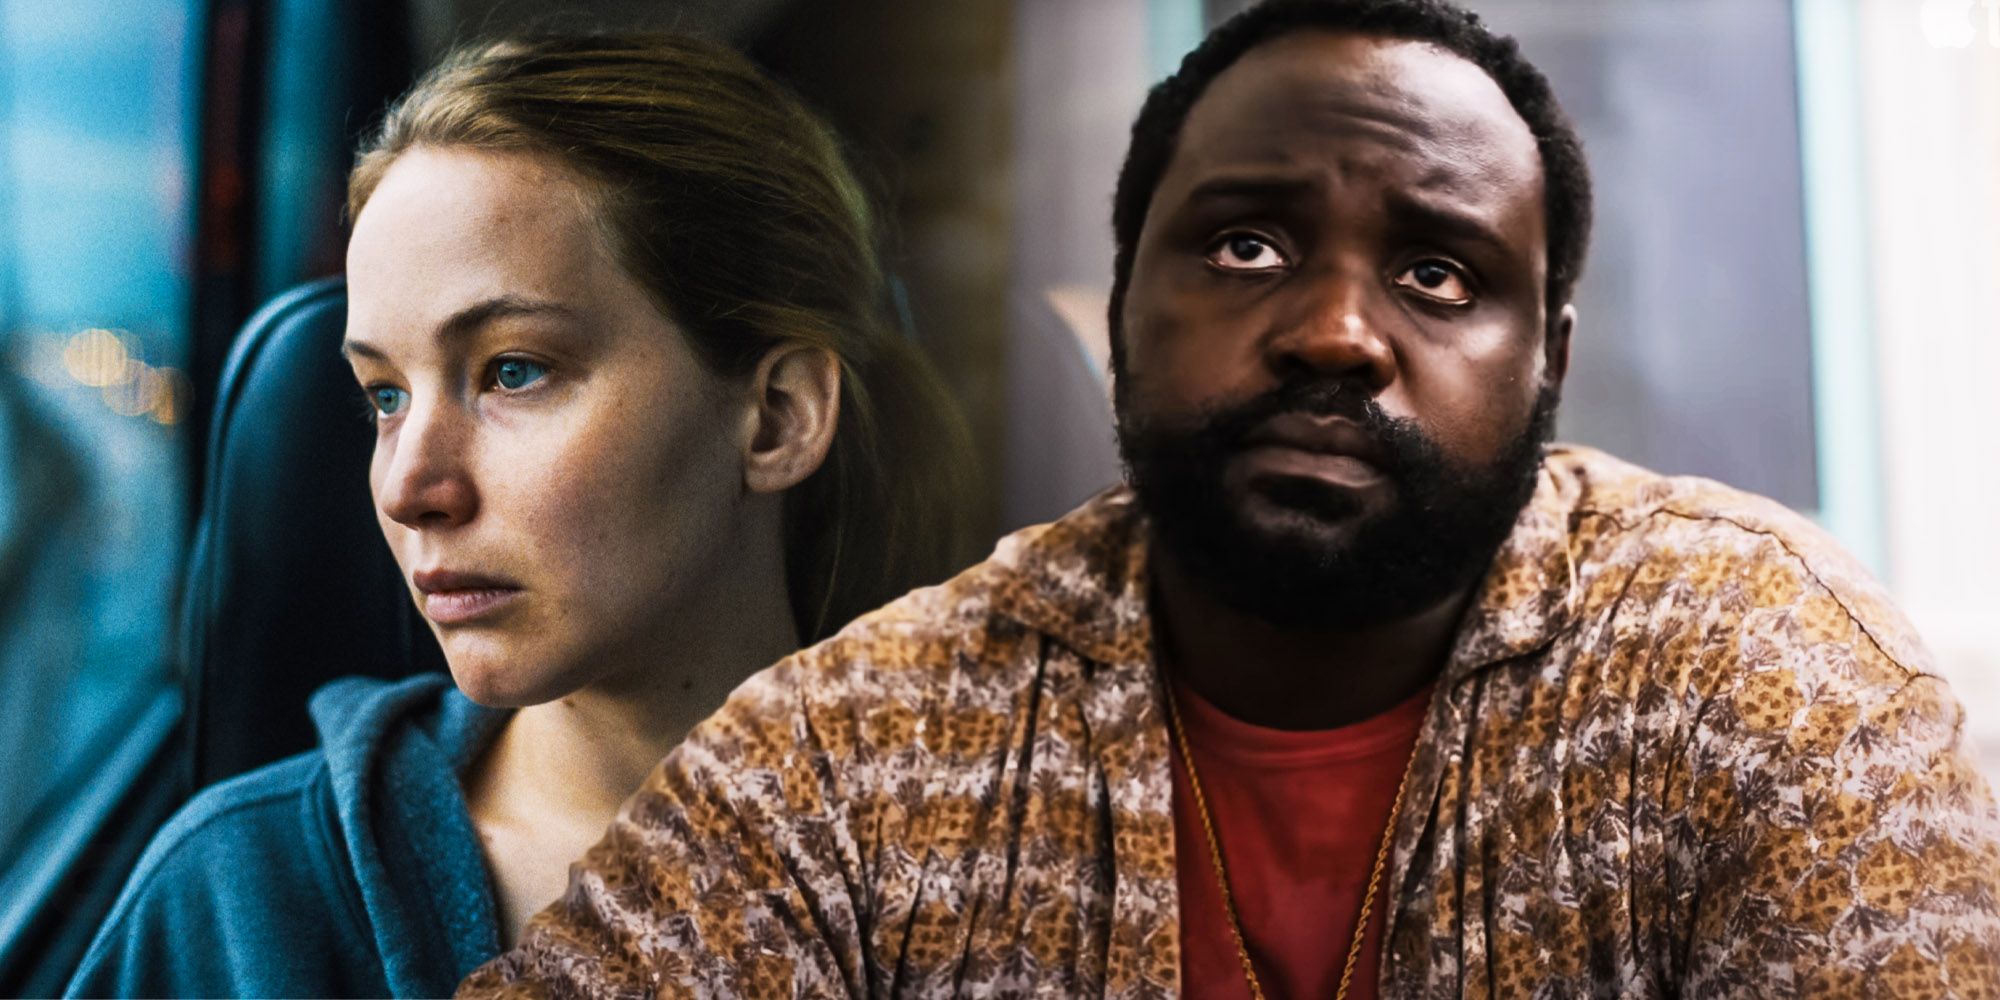 A split screen of Brian Tyree Henry and Jennifer Lawrence in Causeway.